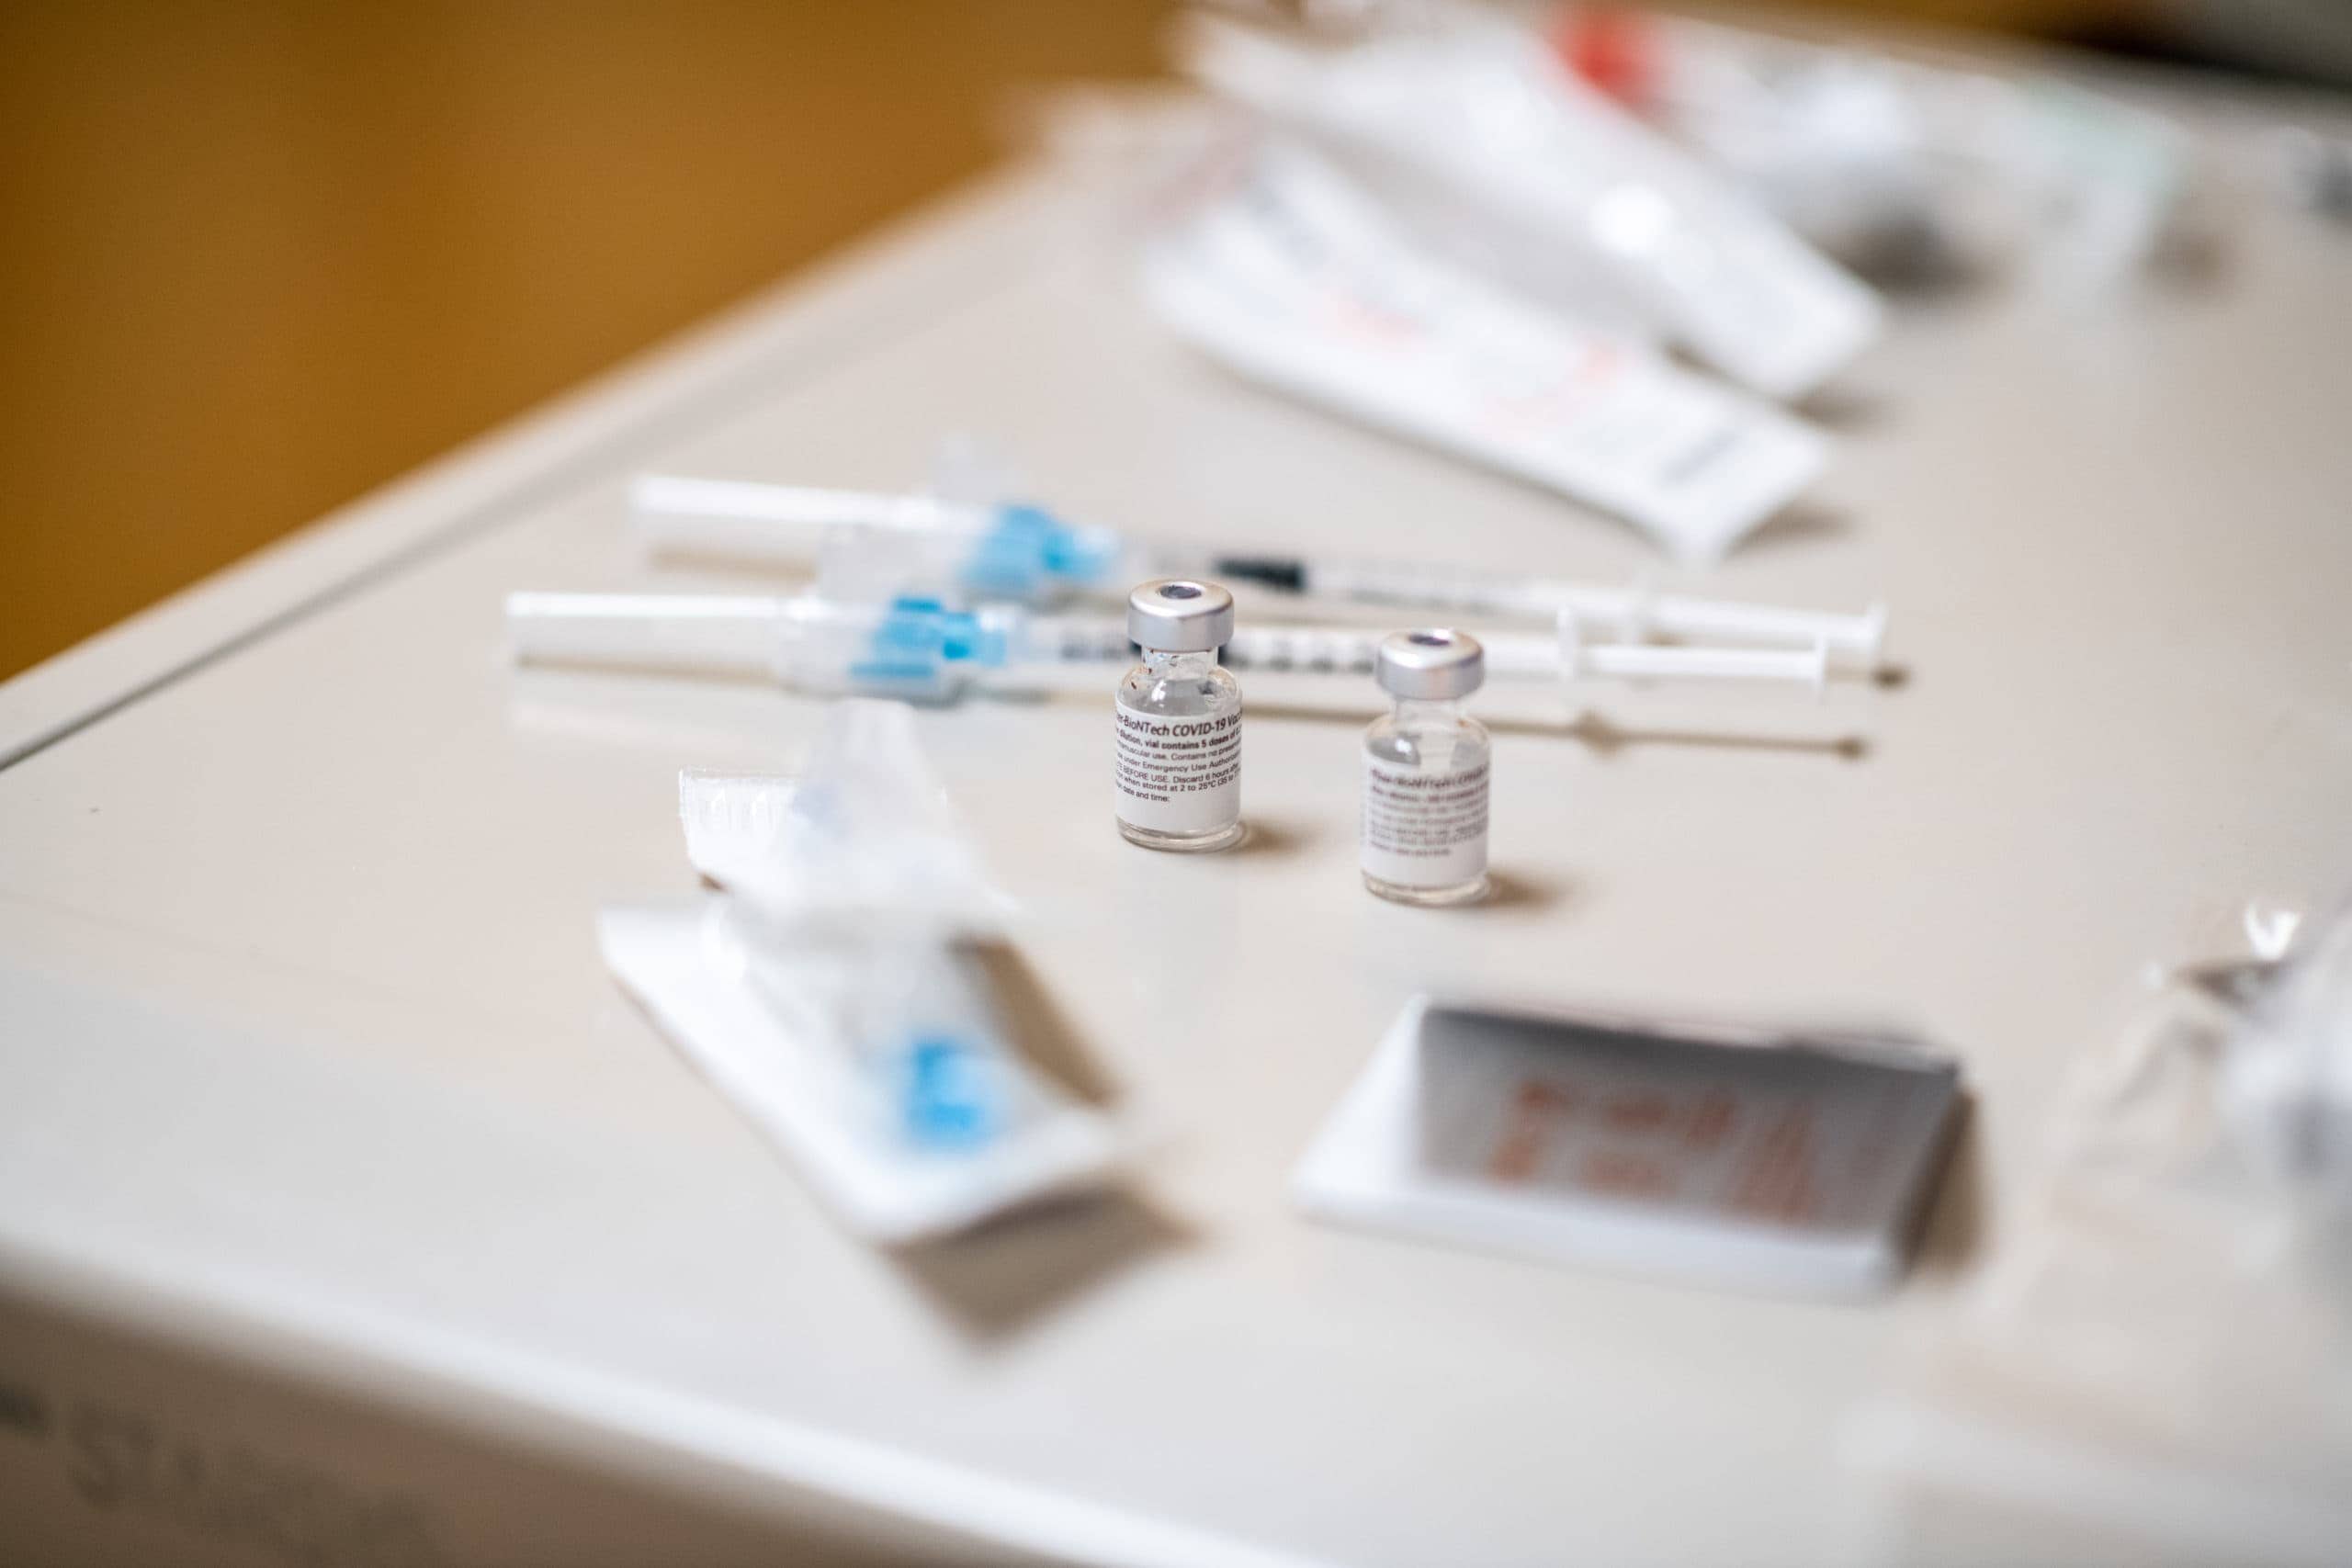 The University of Arkansas for Medical Sciences (UAMS) will begin offering third doses of the Pfizer COVID-19 vaccine to qualifying individuals on Monday, Sept. 27, at the Vaccine Clinic at 401 S. Monroe St. in Little Rock. This clinic also provides seasonal flu vaccines.